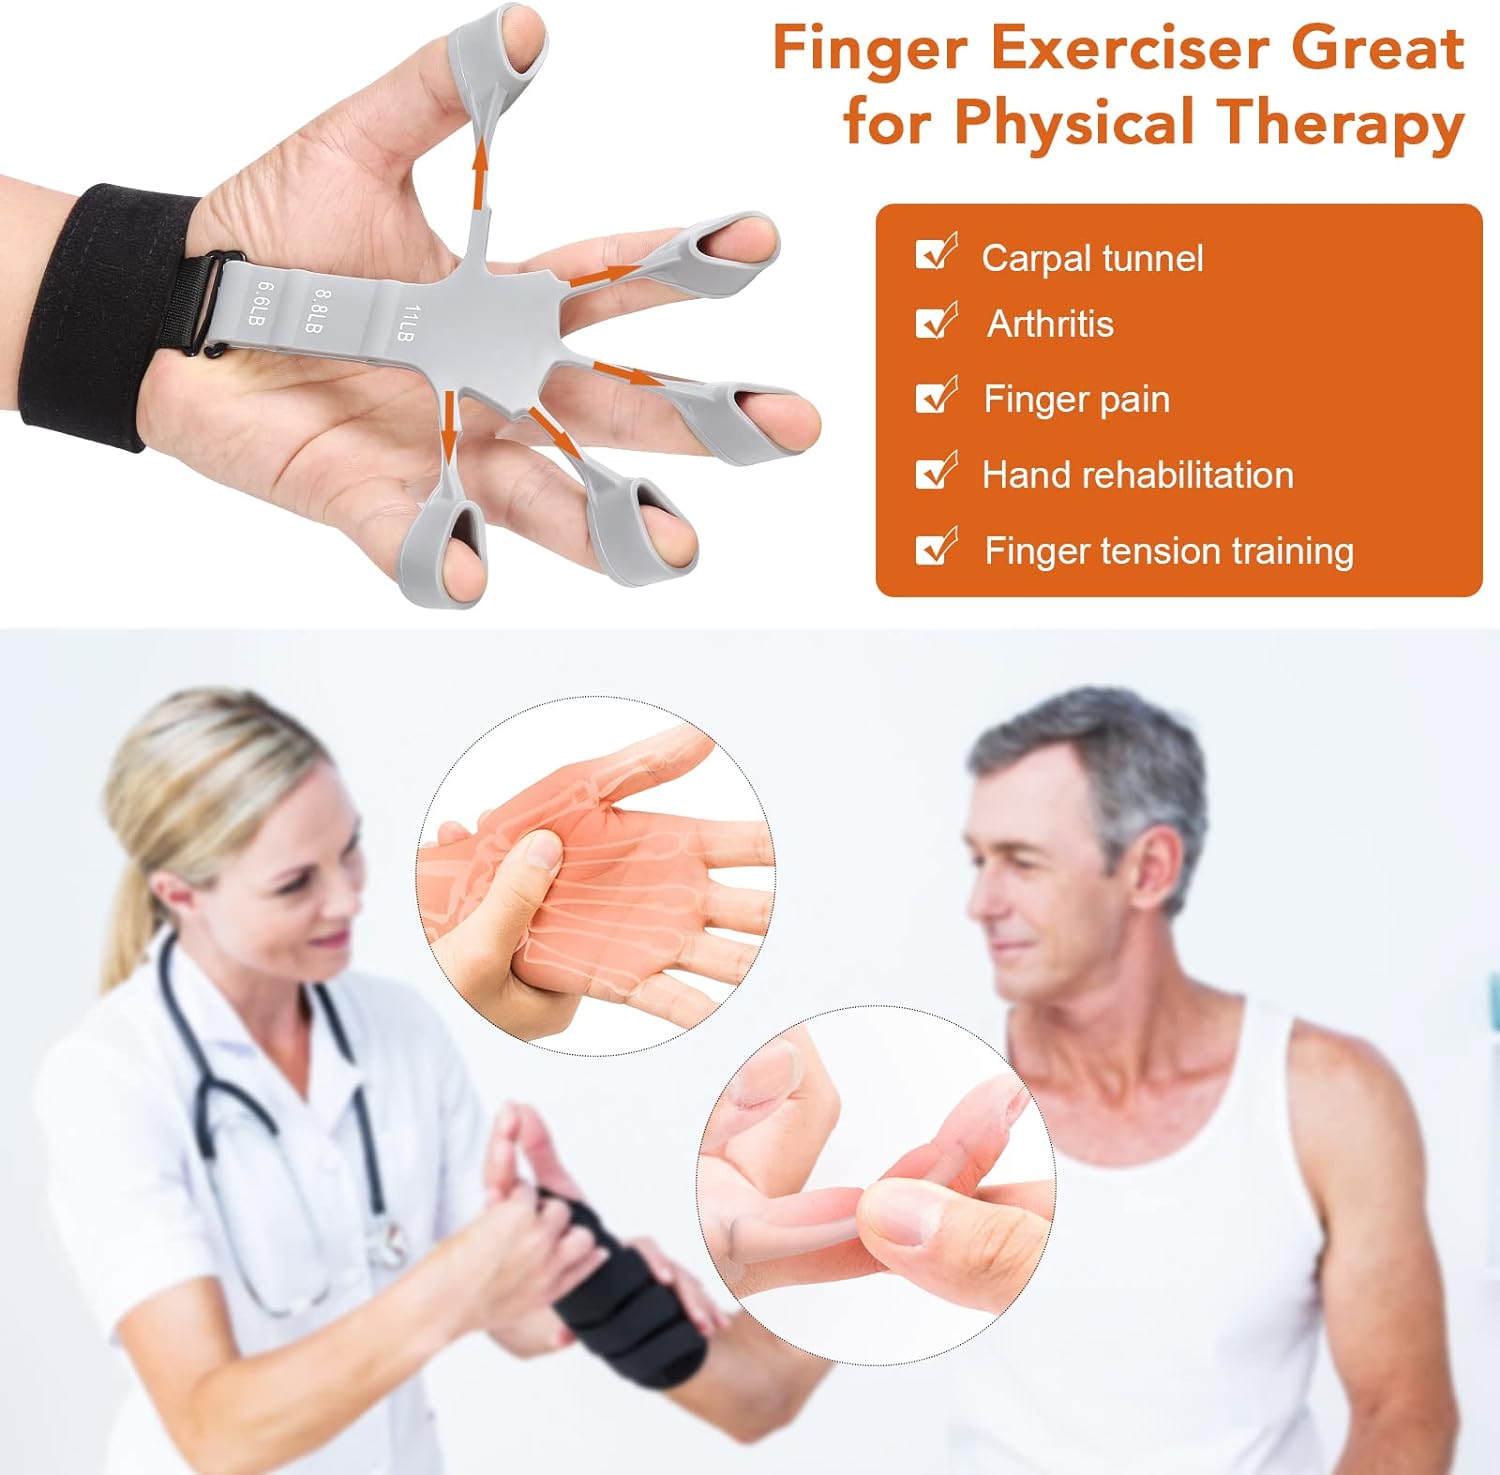 Hand Grip Strengthener - Adjustable Finger Exerciser and Finger Stretcher - Grip Strength Trainer for Hand Therapy, Rock Climbing - Relieve Pain for Arthritis, Carpal Tunnel